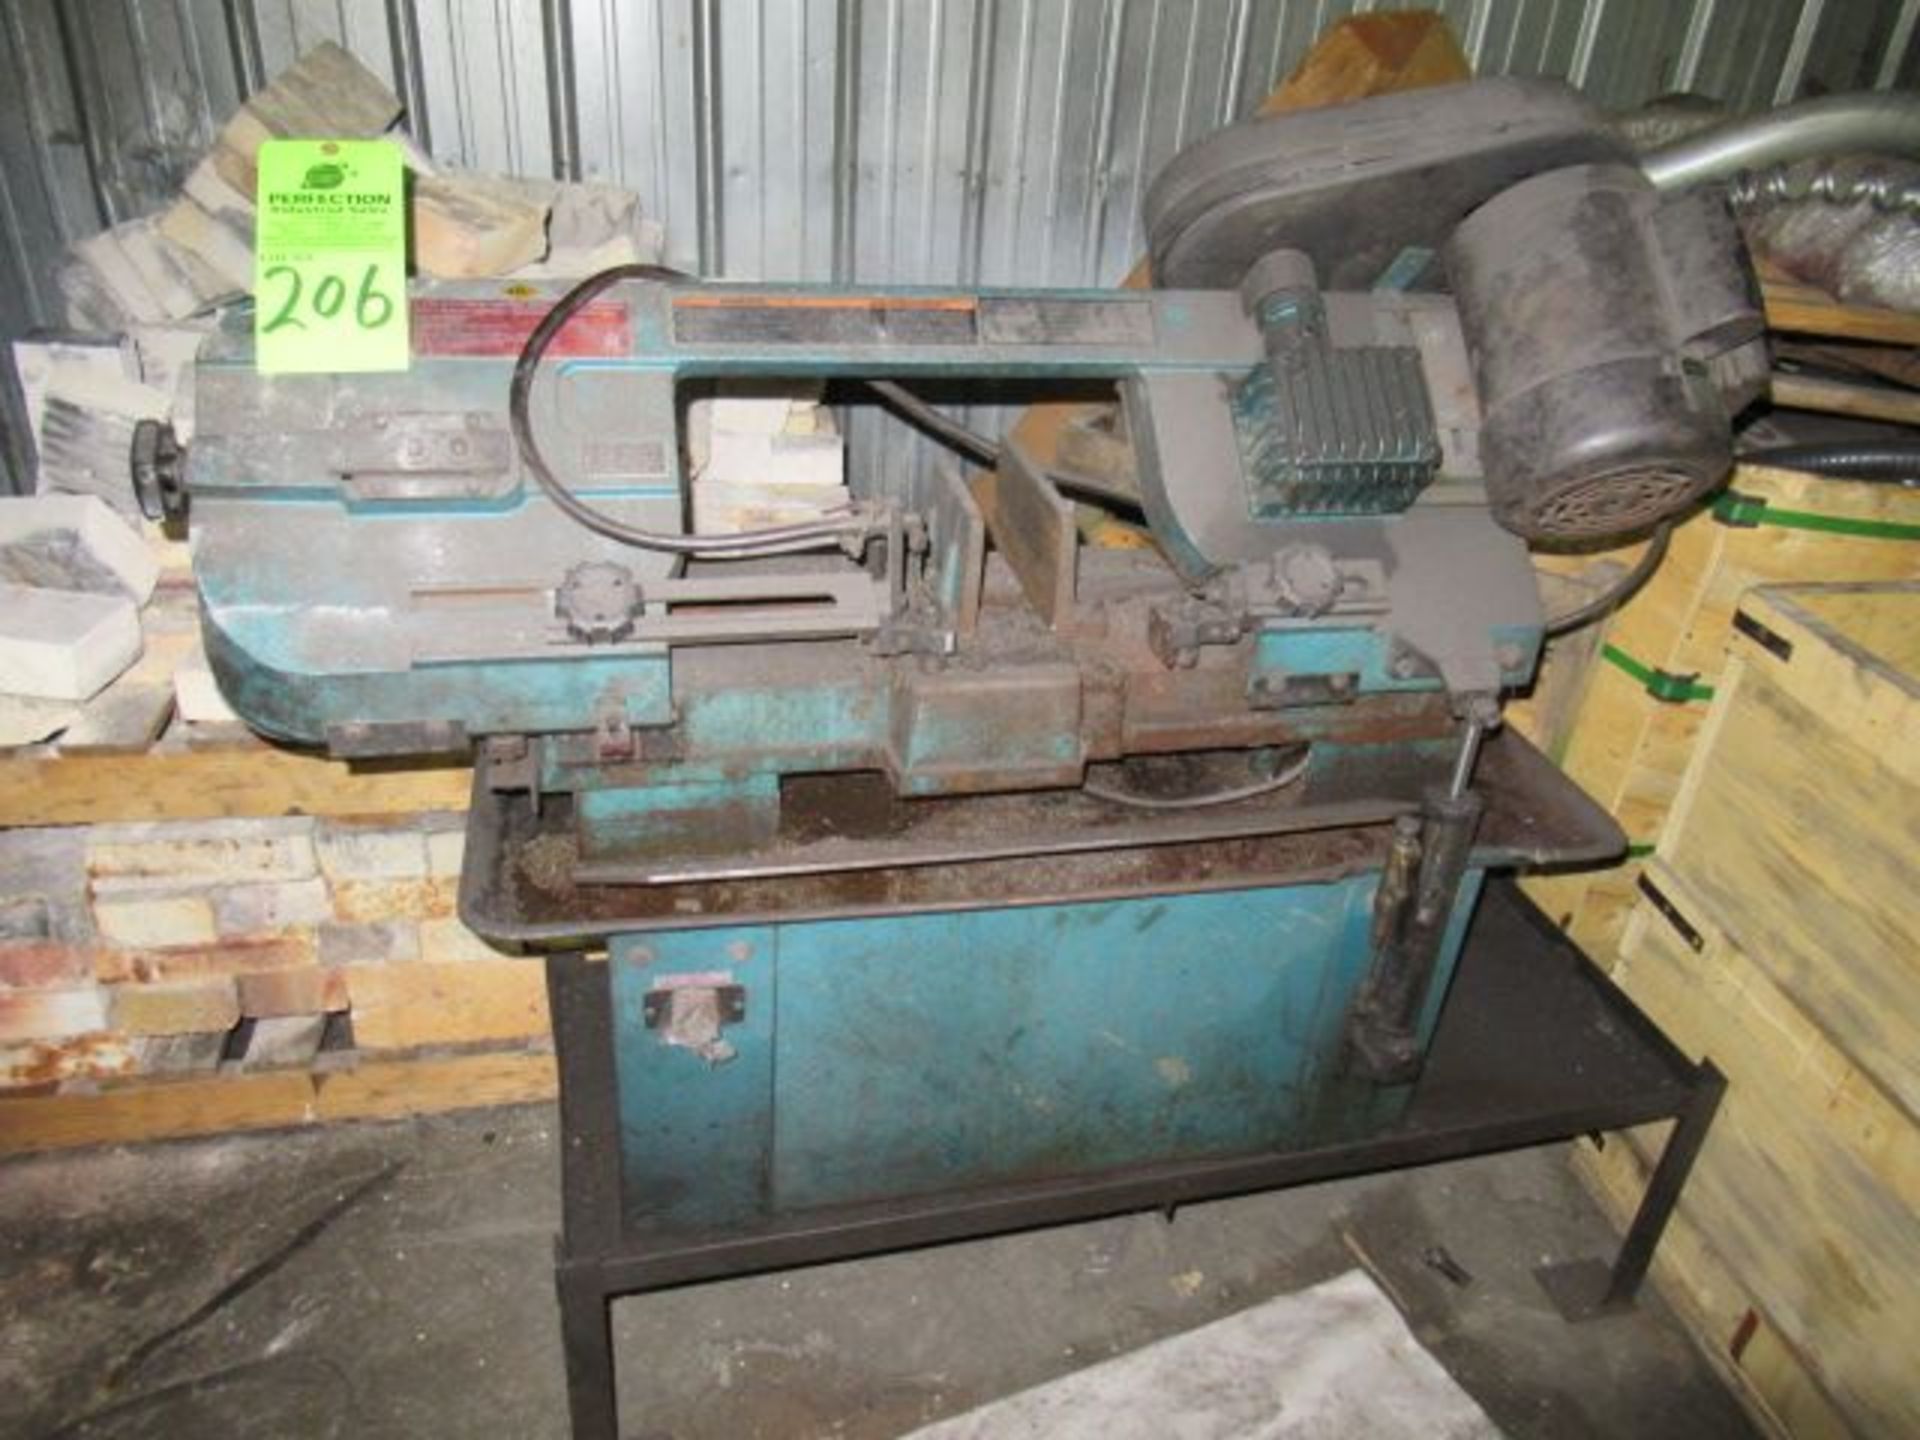 ITC 7 x 12" Horizontal-Vertical Cutting Bandsaw 120/240 V., s/n 028033 ($75 Rigging Cost) - Image 2 of 3